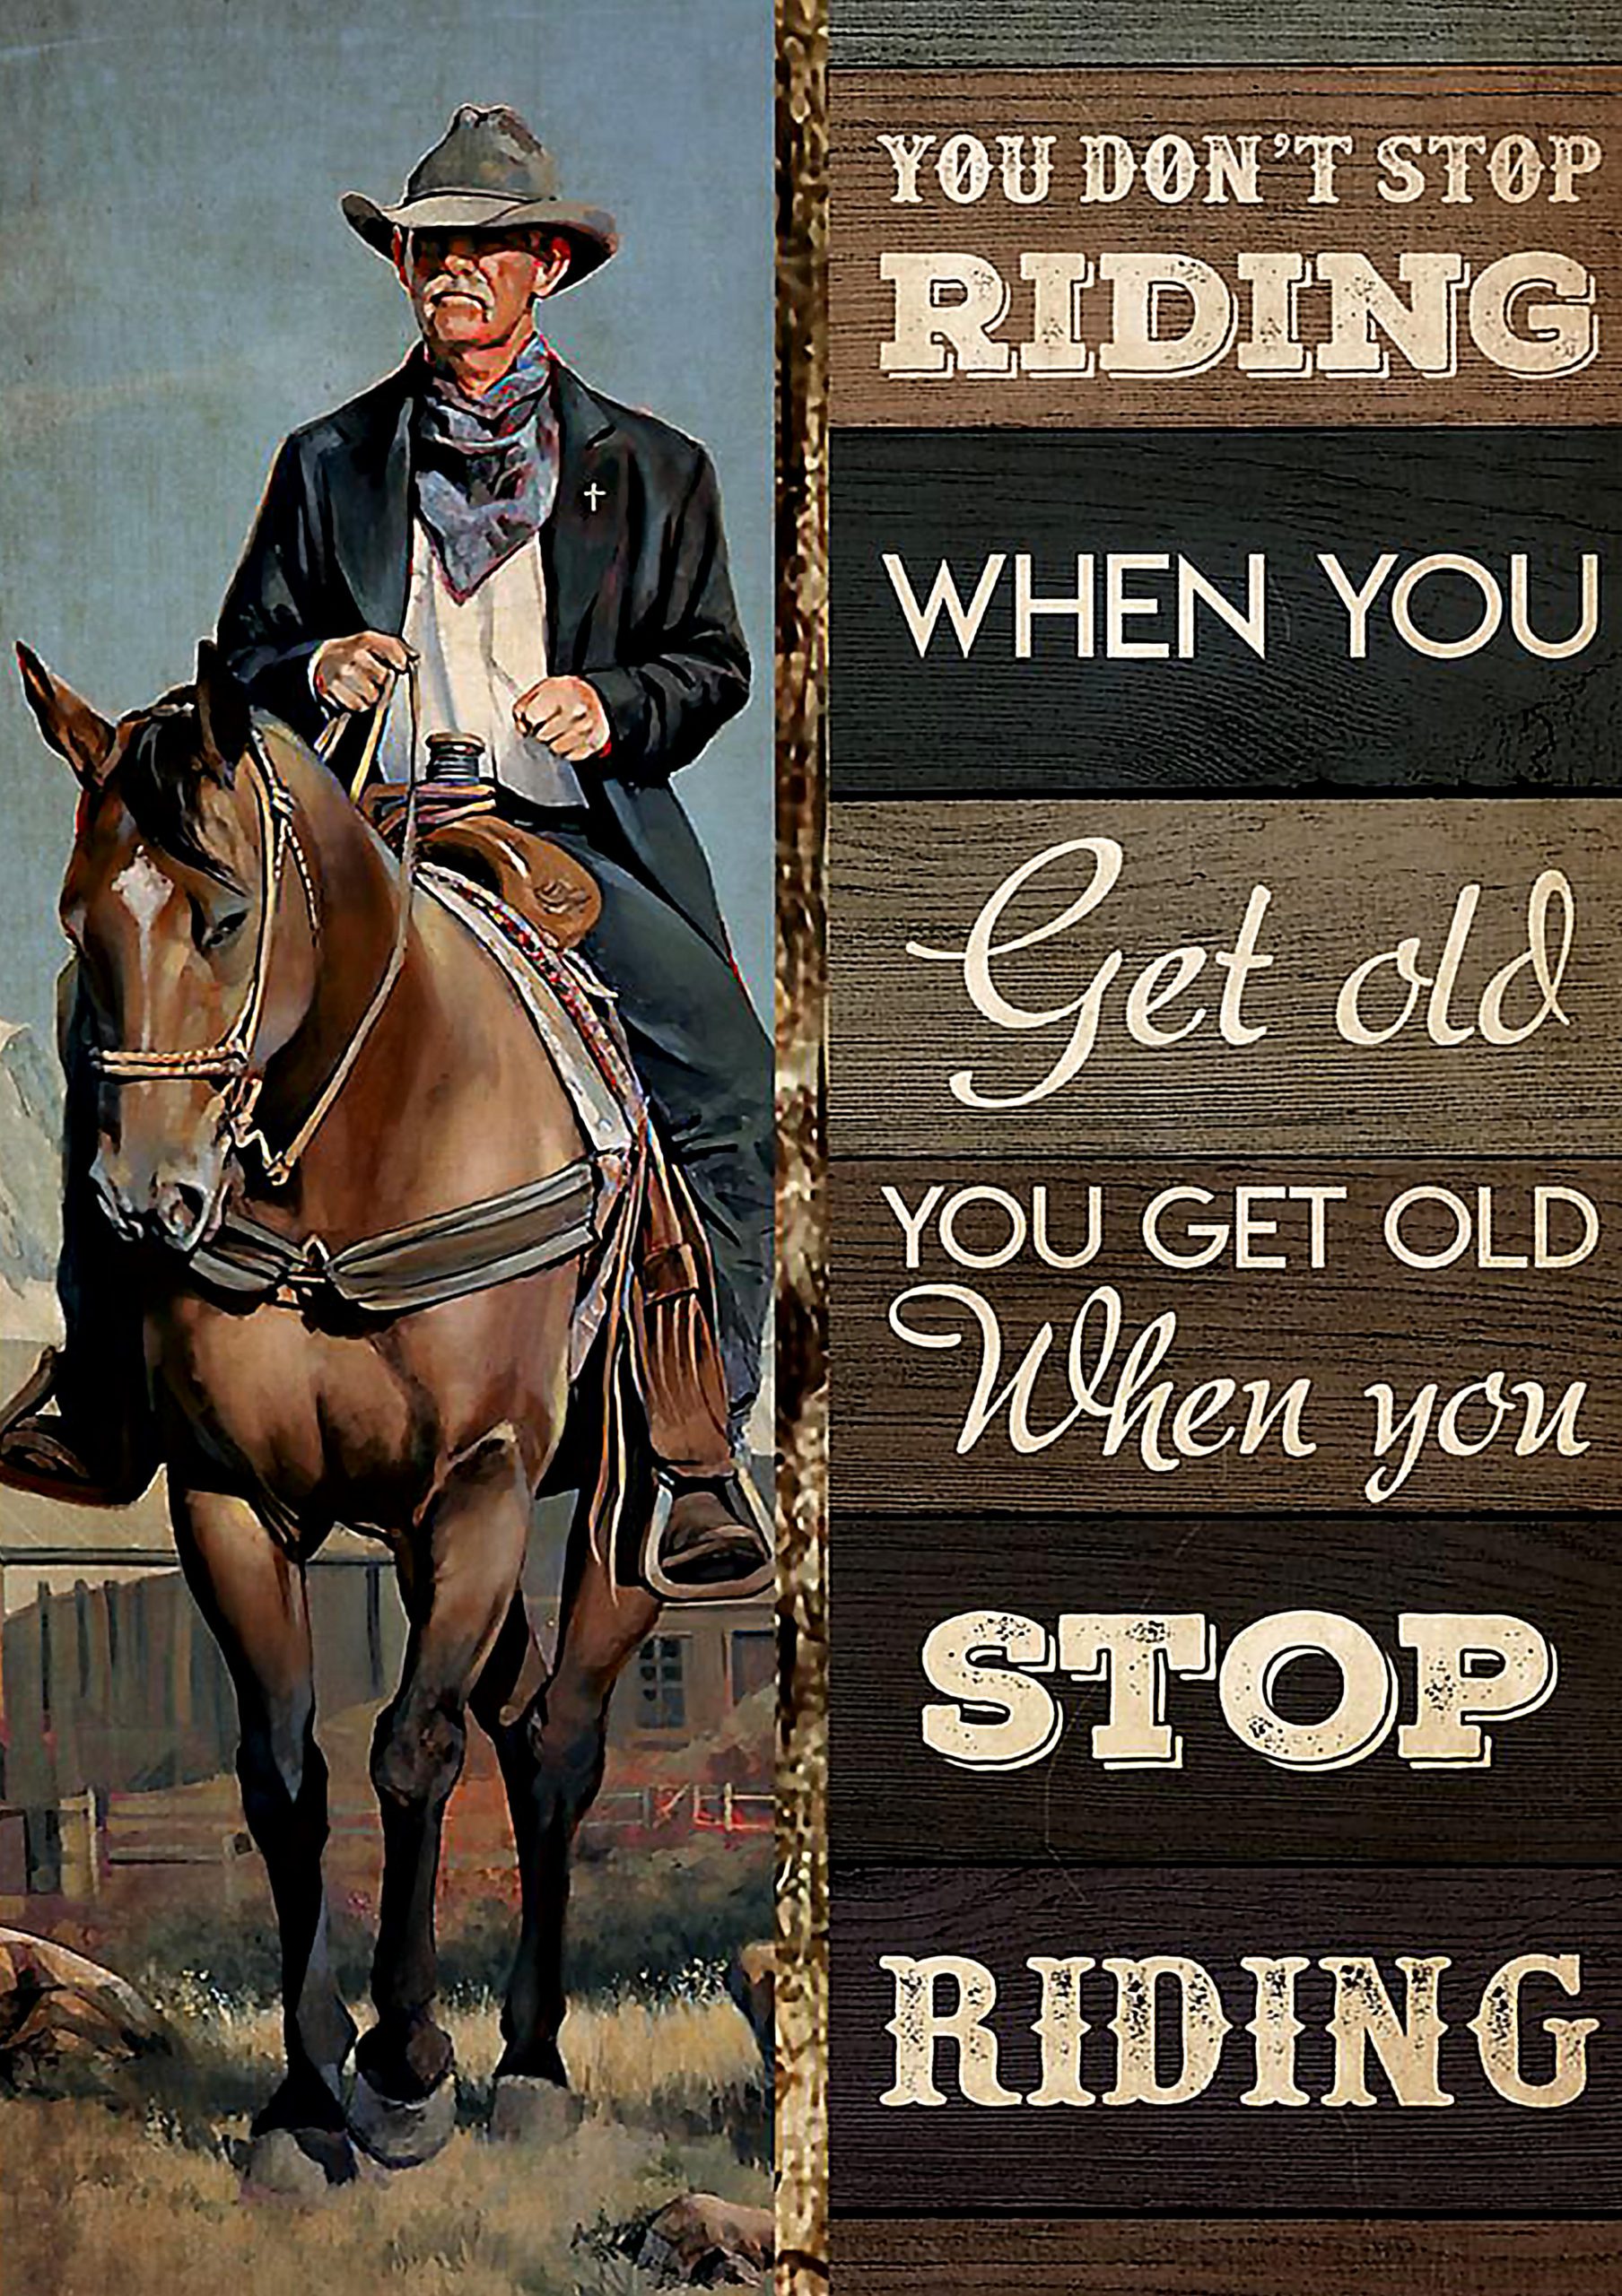 vintage old cowboy you dont stop riding when you get old poster 1